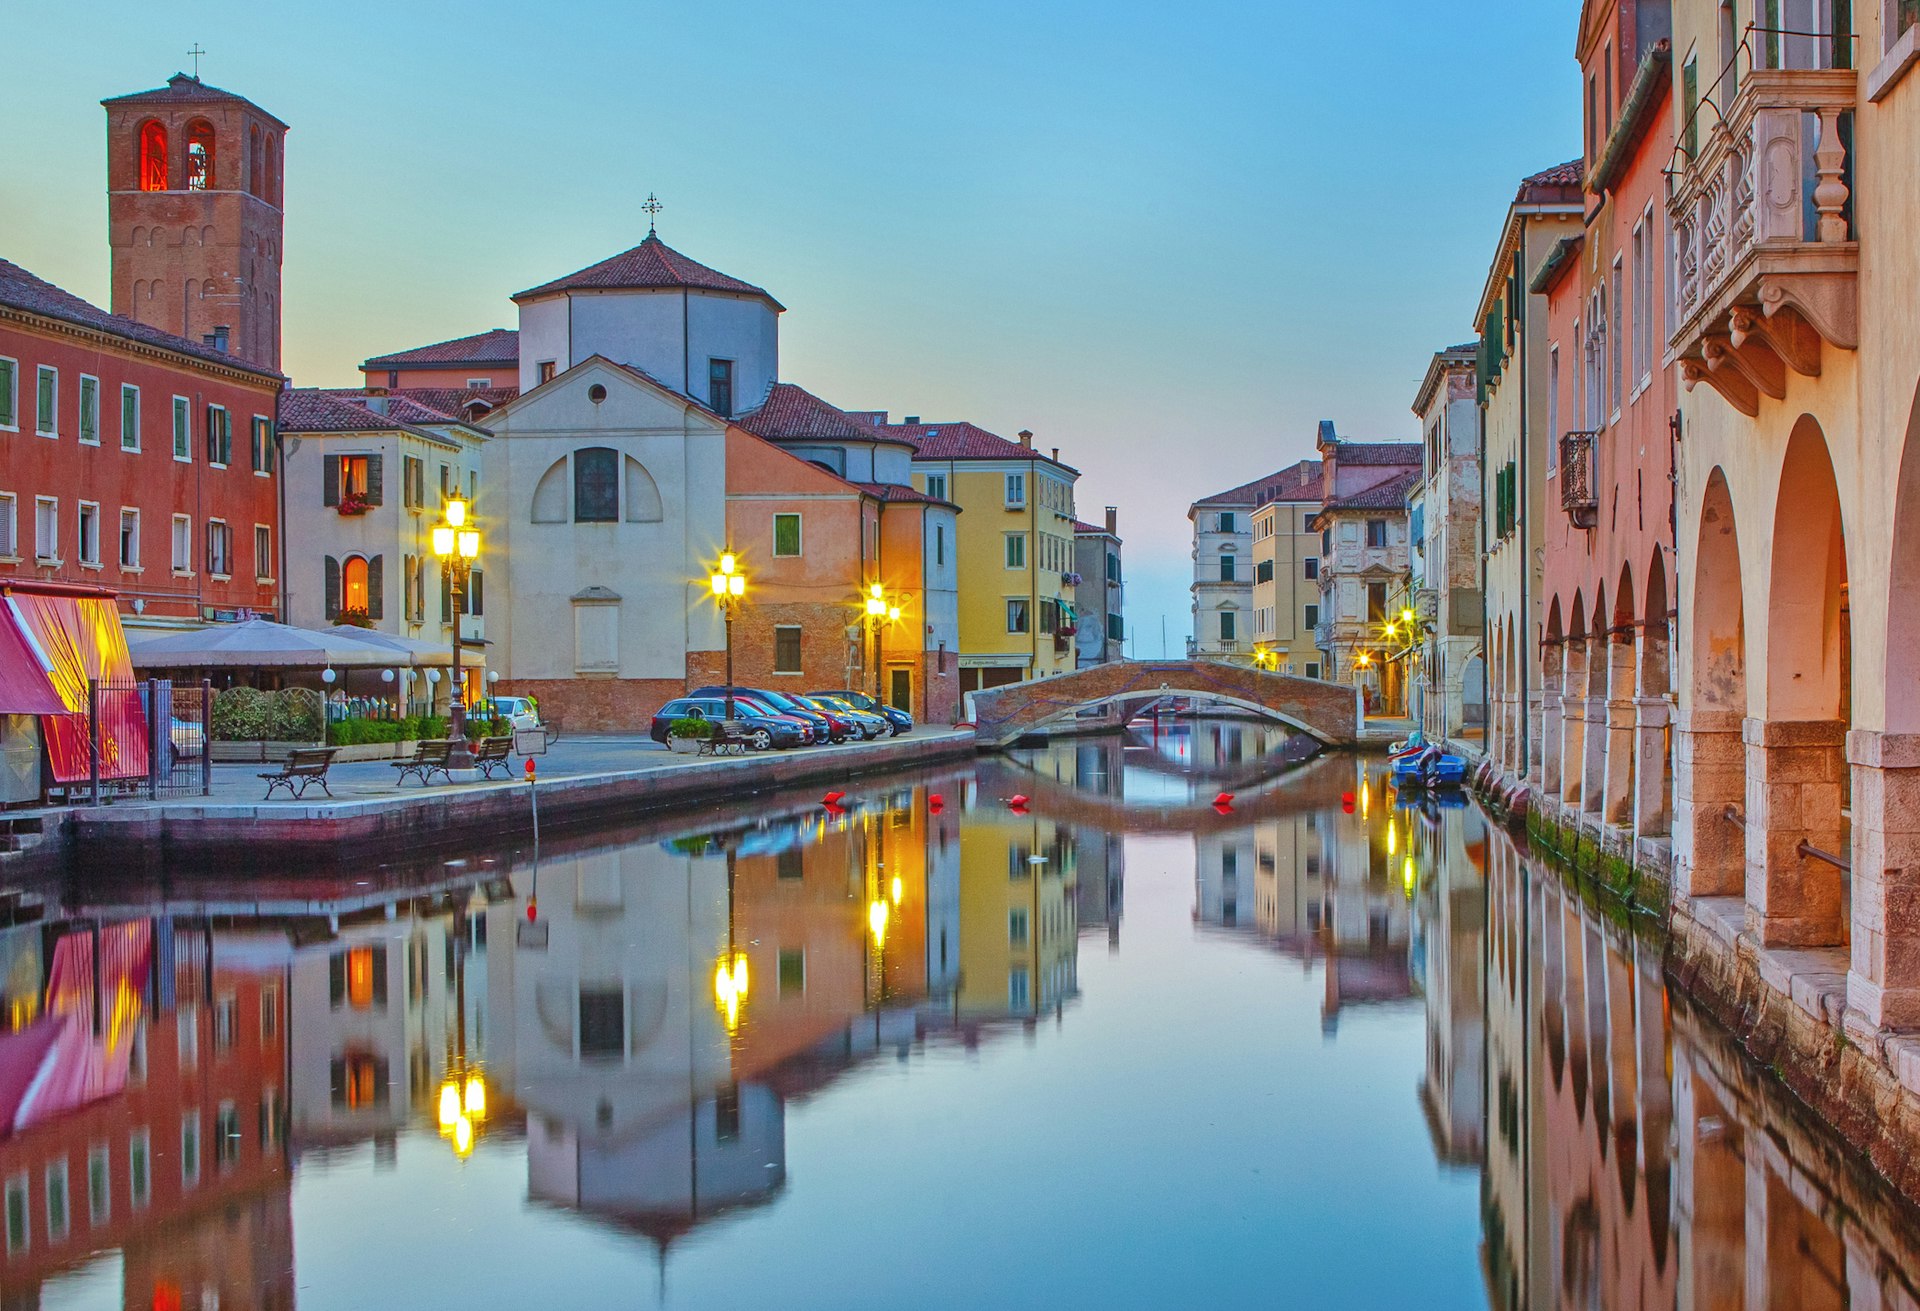 A view of canal Vena at dusk in Chioggia with colorful buildings along each side